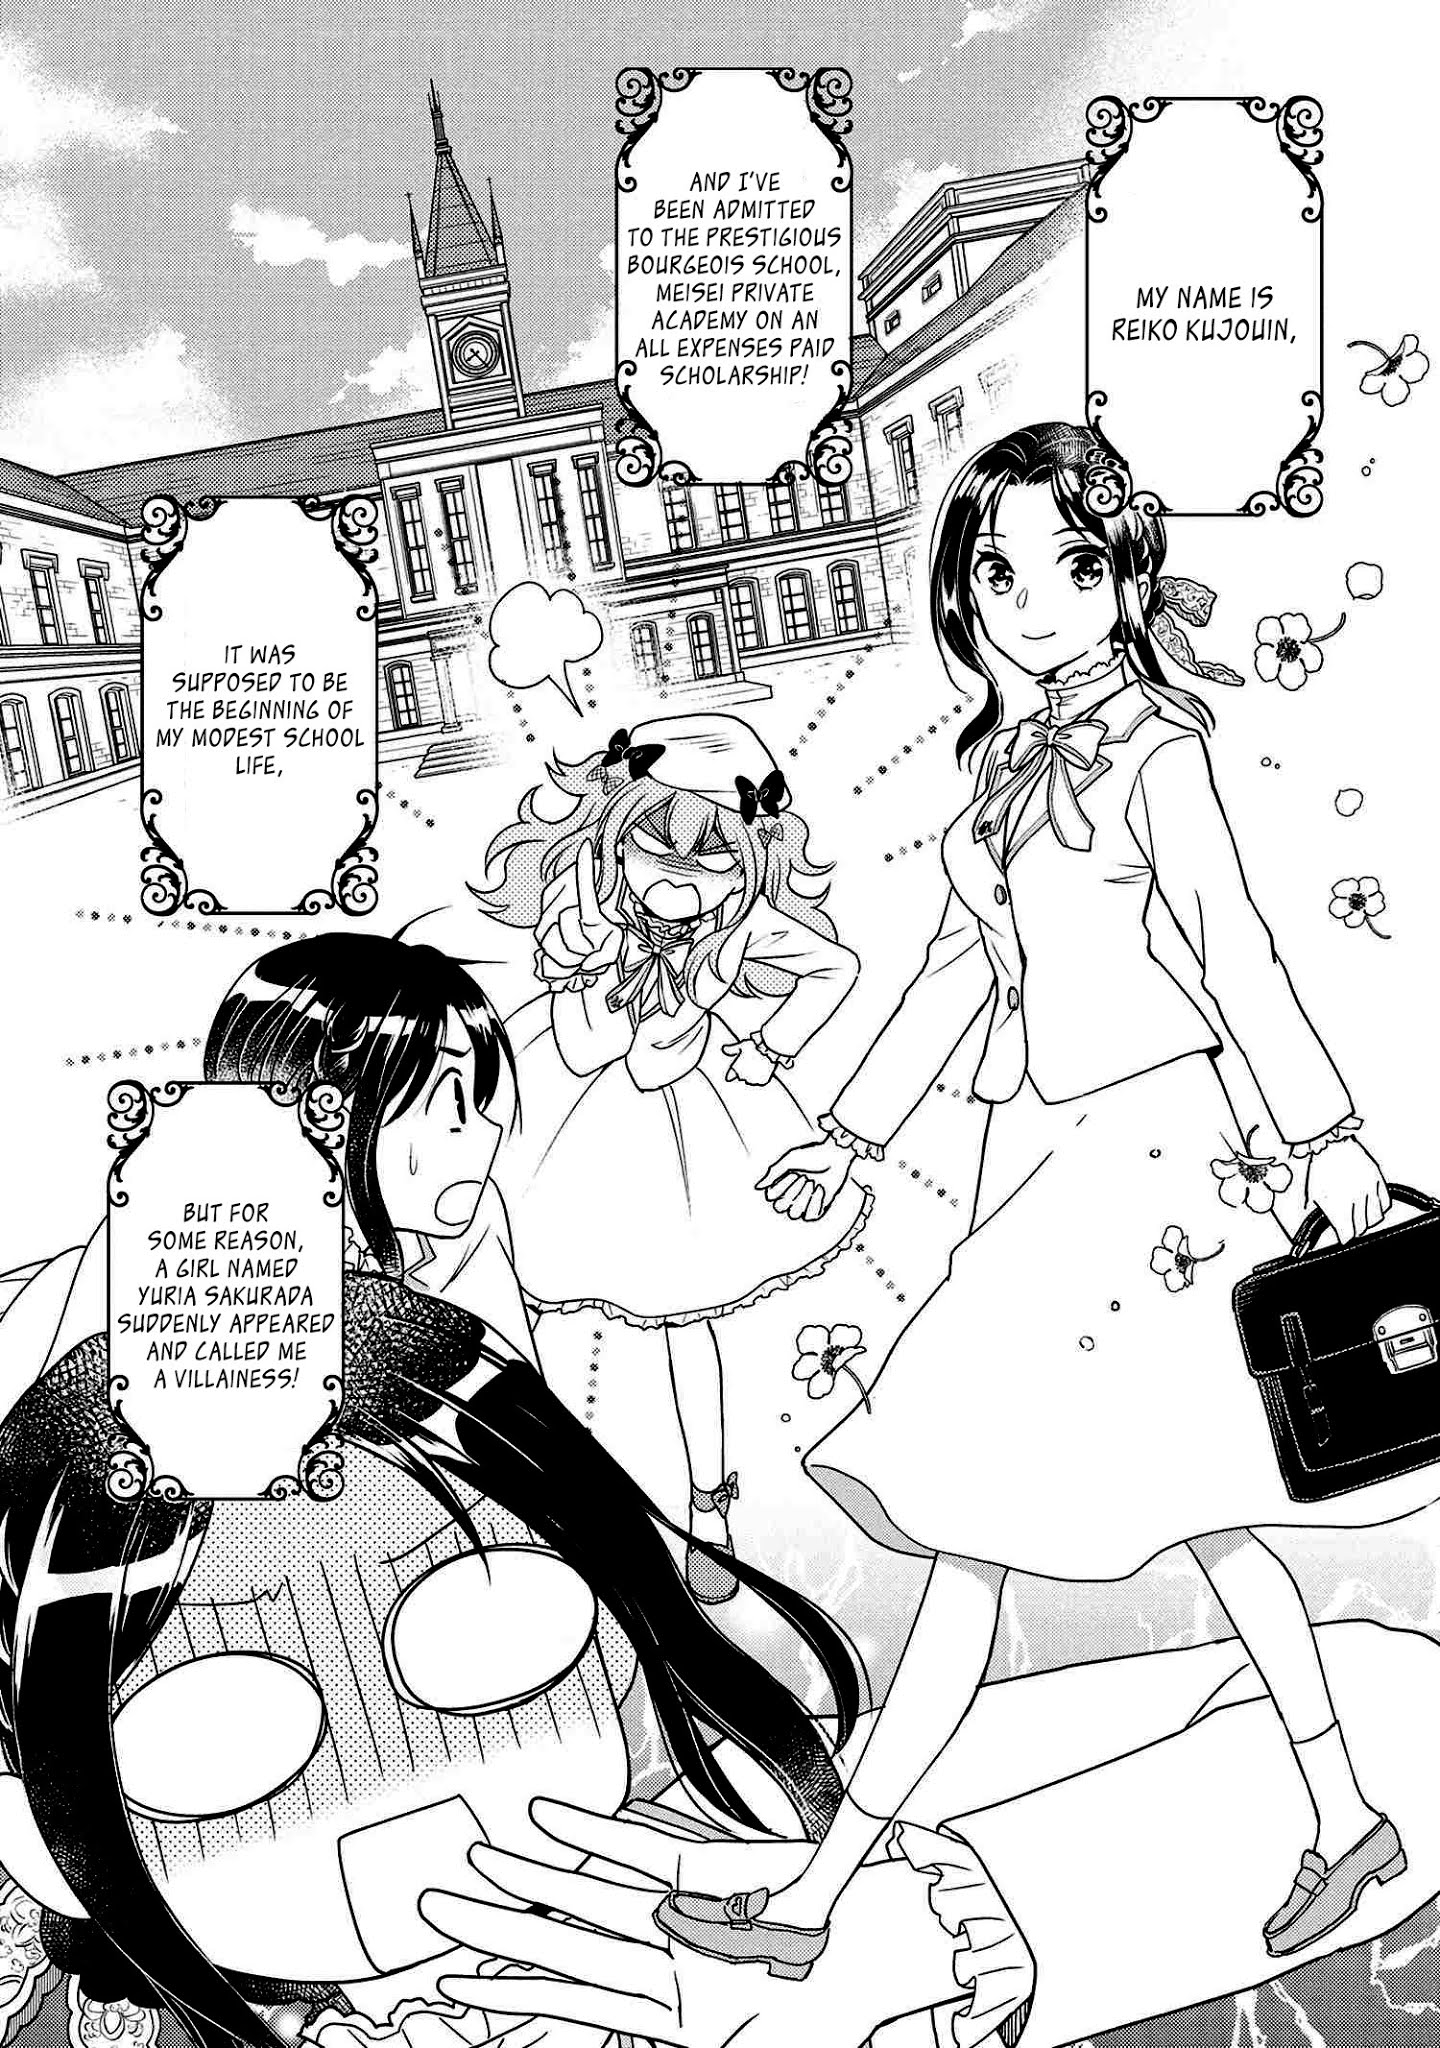 Reiko's Style: Despite Being Mistaken For A Rich Villainess, She's Actually Just Penniless Chapter 2 #3